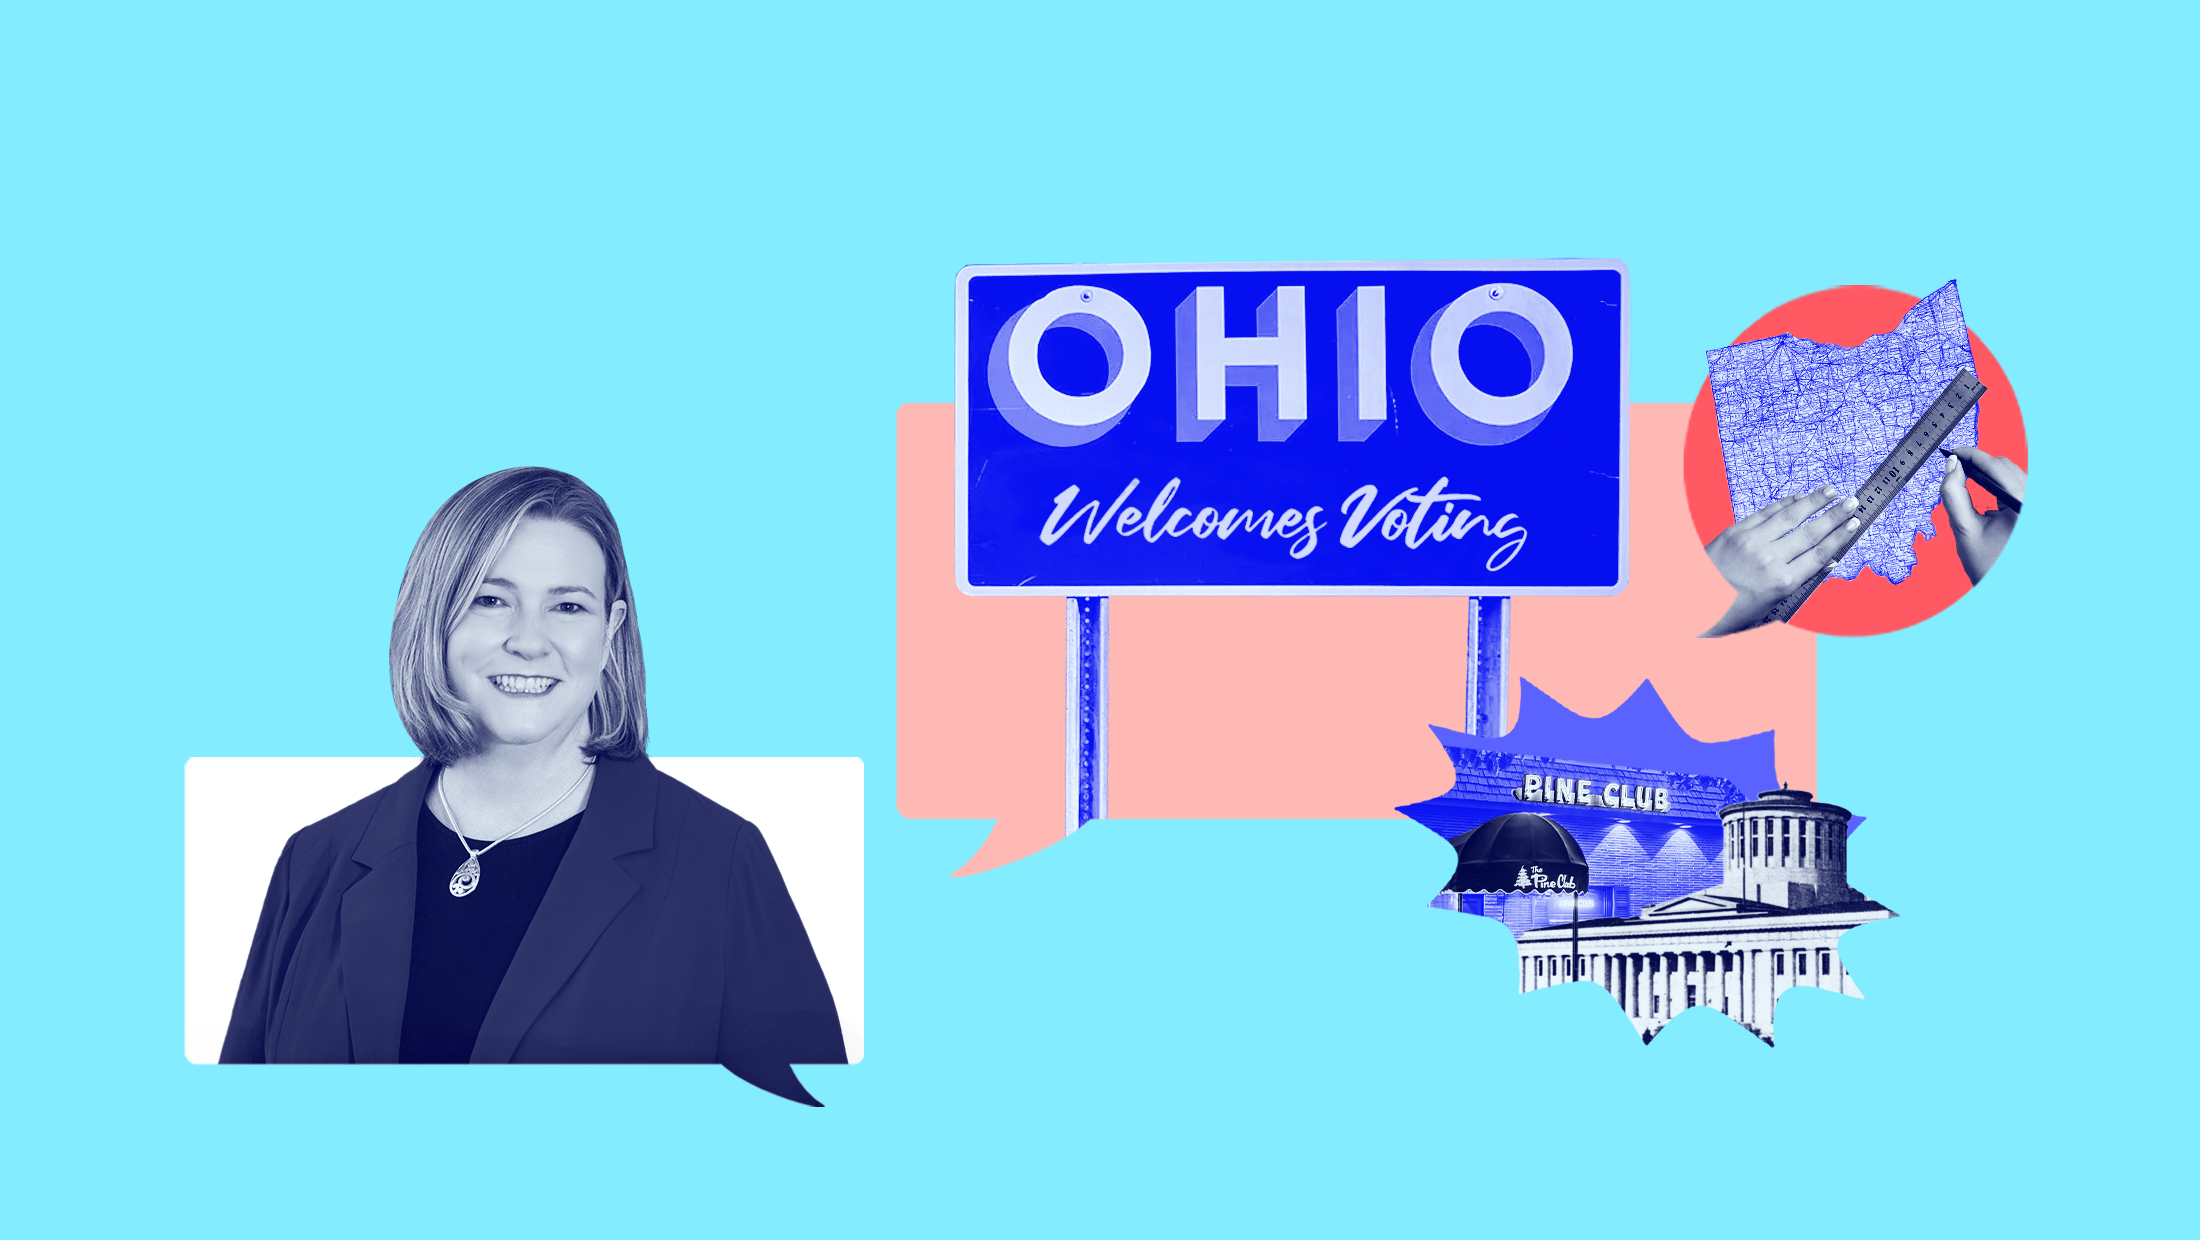 Light blue background with blue-toned image of Ohio gubernatorial candidate Nan Whaley, a sign that reads "OHIO Welcomes Voting," an blue-toned image of a map of Ohio and a person holding a ruler, an image of the Ohio state capitol and The Pine Club in Dayton, Ohio.